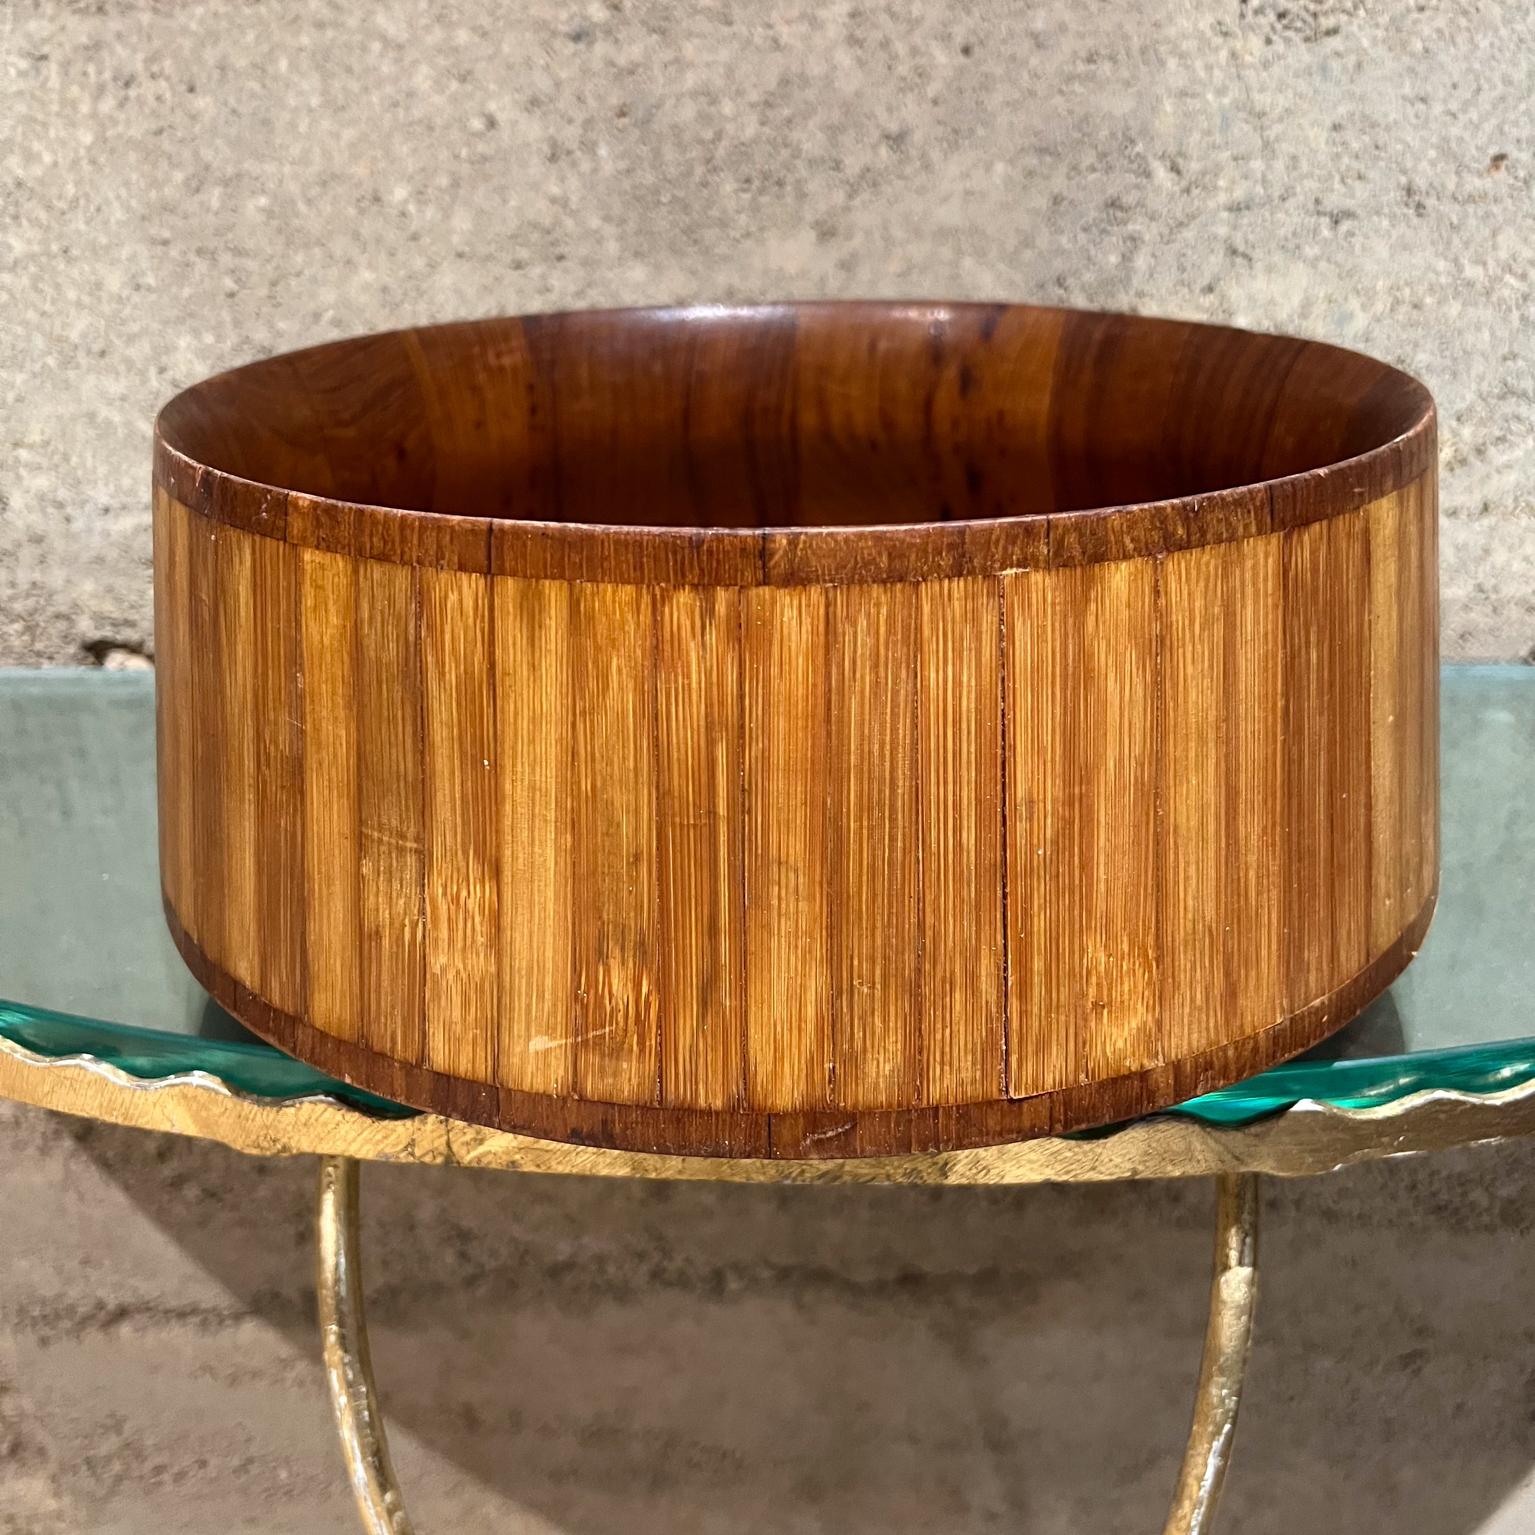 AMBIANIC presents
1960s Dansk Teak and Bamboo Salad Bowl by Jens Quistgaard
Dansk Design IHQ Denmark
5 x 11.75
Maker stamped.
Preowned Original vintage unrestored condition
See all images provided.